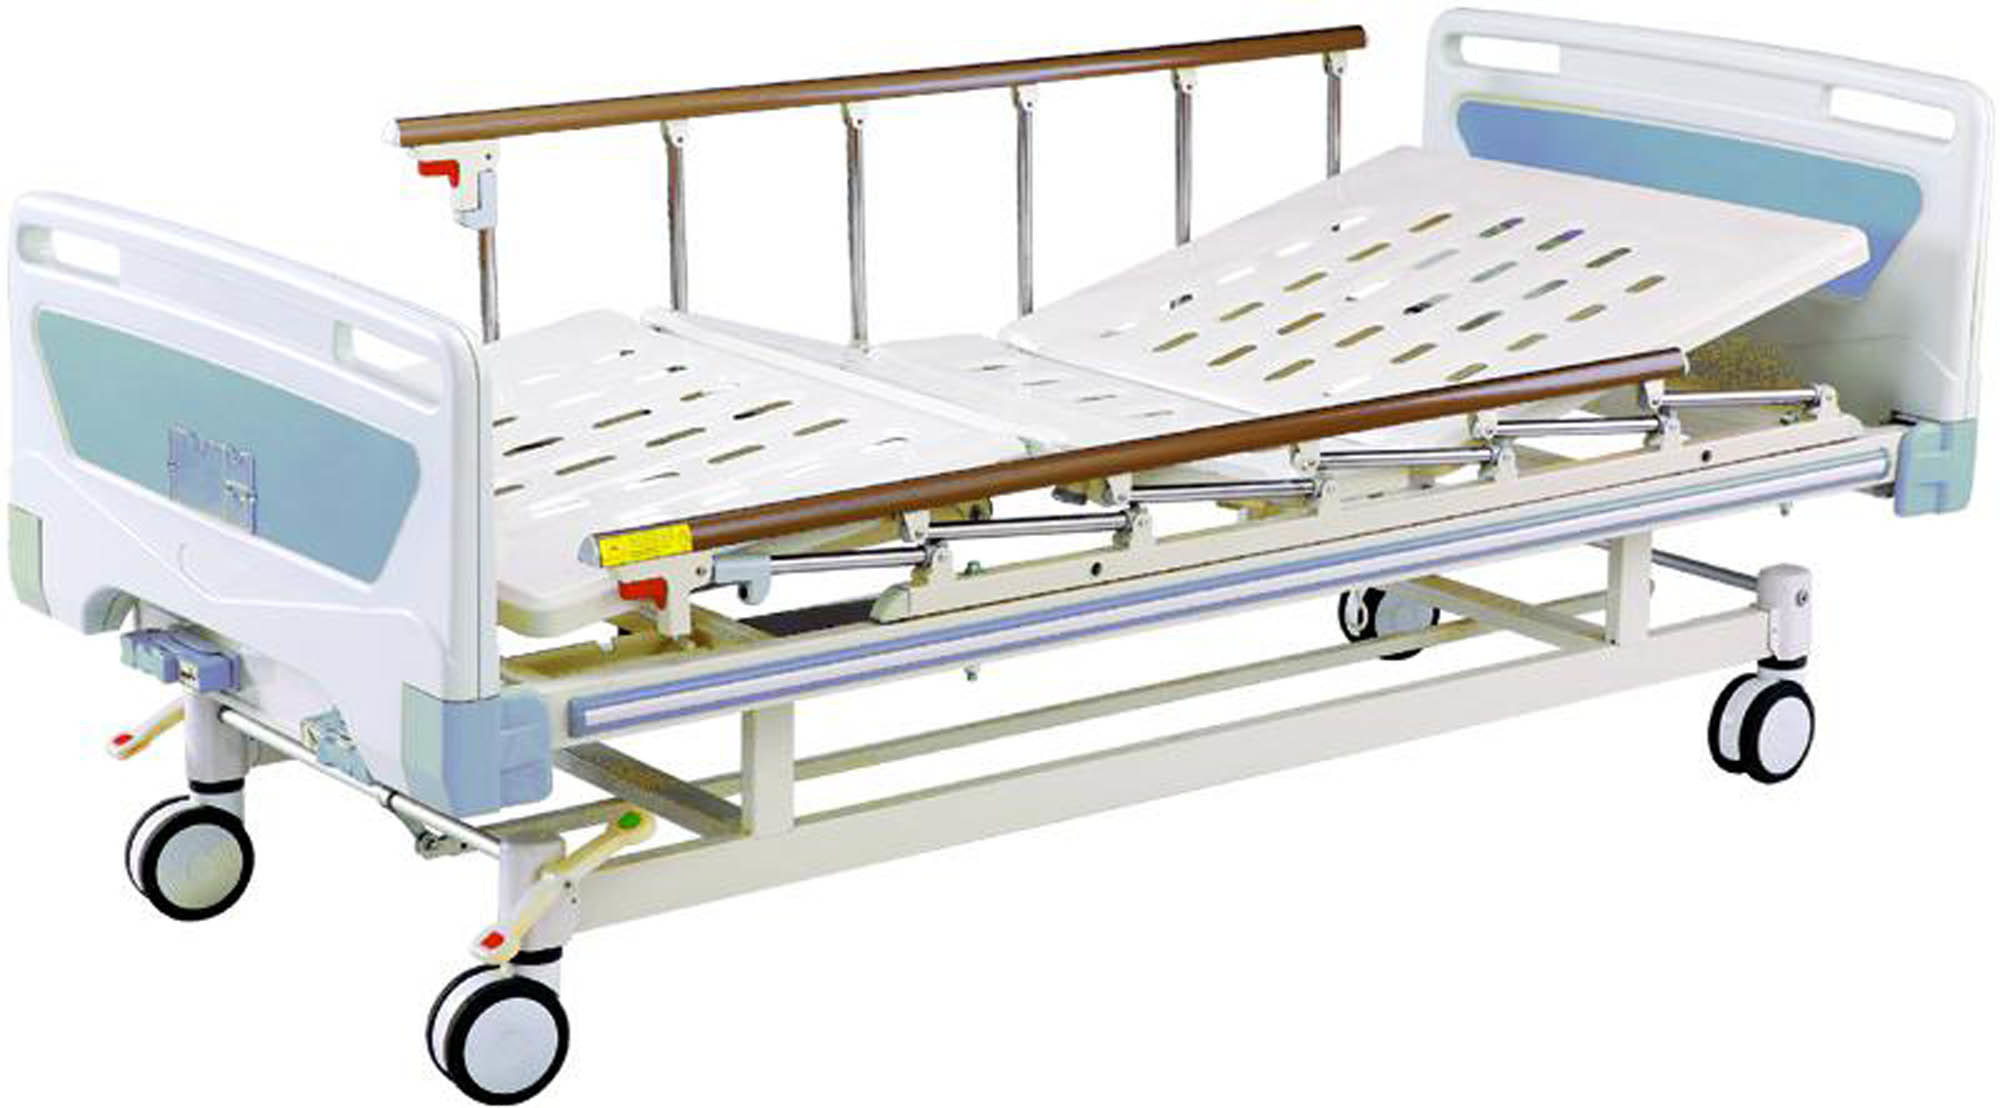 Medical Equipment Movable Two-Fuction Full-Fowler Hospital Bed